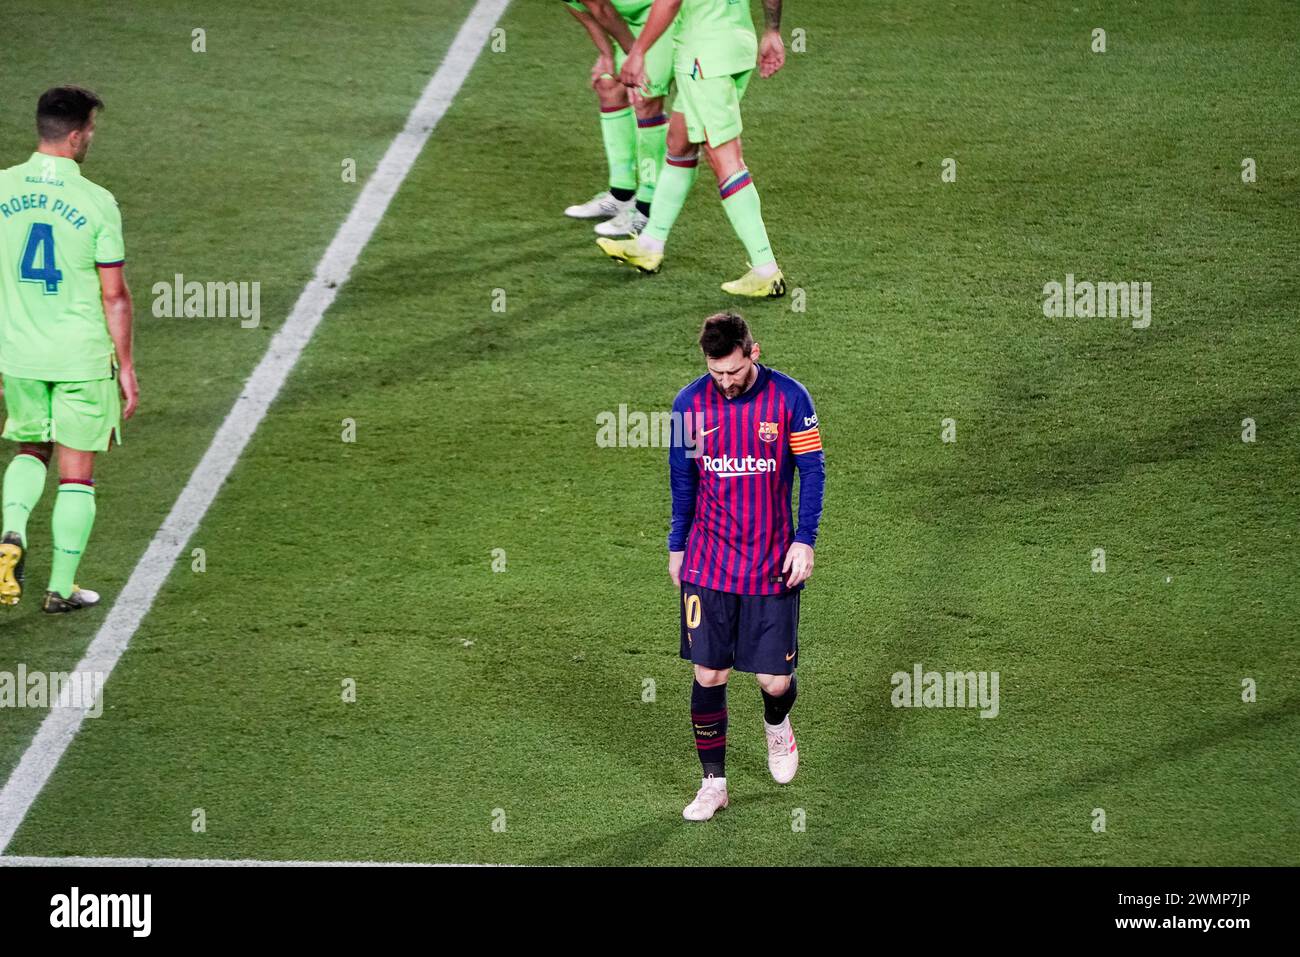 LIONEL MESSI, BARCELONA FC, 2019: Lionel Messi walks to the touchline with his head bowed. The final game of the La Liga 2018-19 season in Spain between Barcelona FC and Levante at Camp Nou, Barcelona on 27 April 2019. Barca won the game 1-0 with a second half Messi goal to clinch back-to-back La Liga titles and their eighth in 11 years. Stock Photo